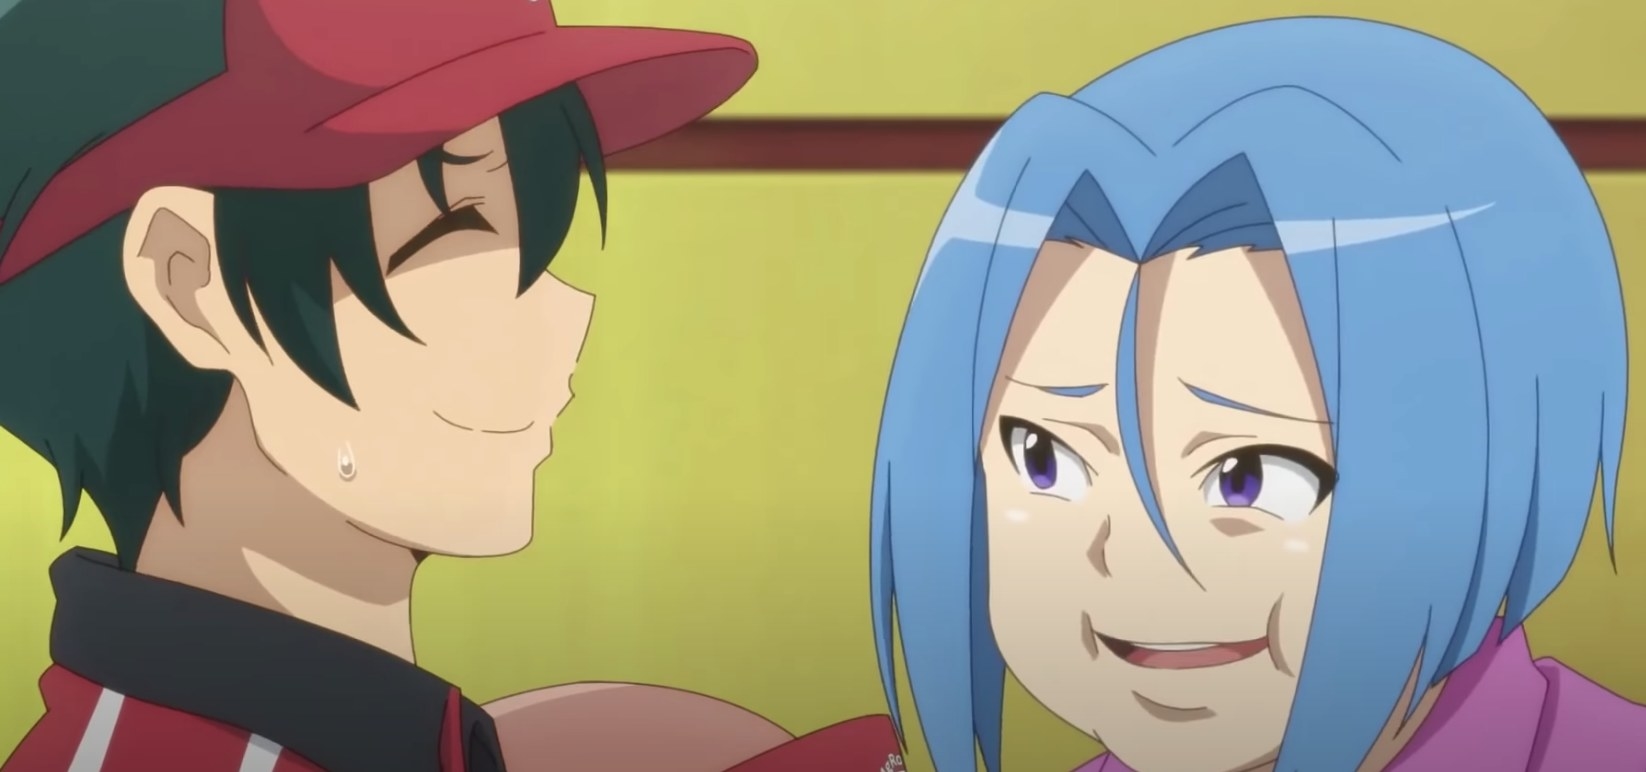 Sadao Maou smiling at another character in the season two trailer